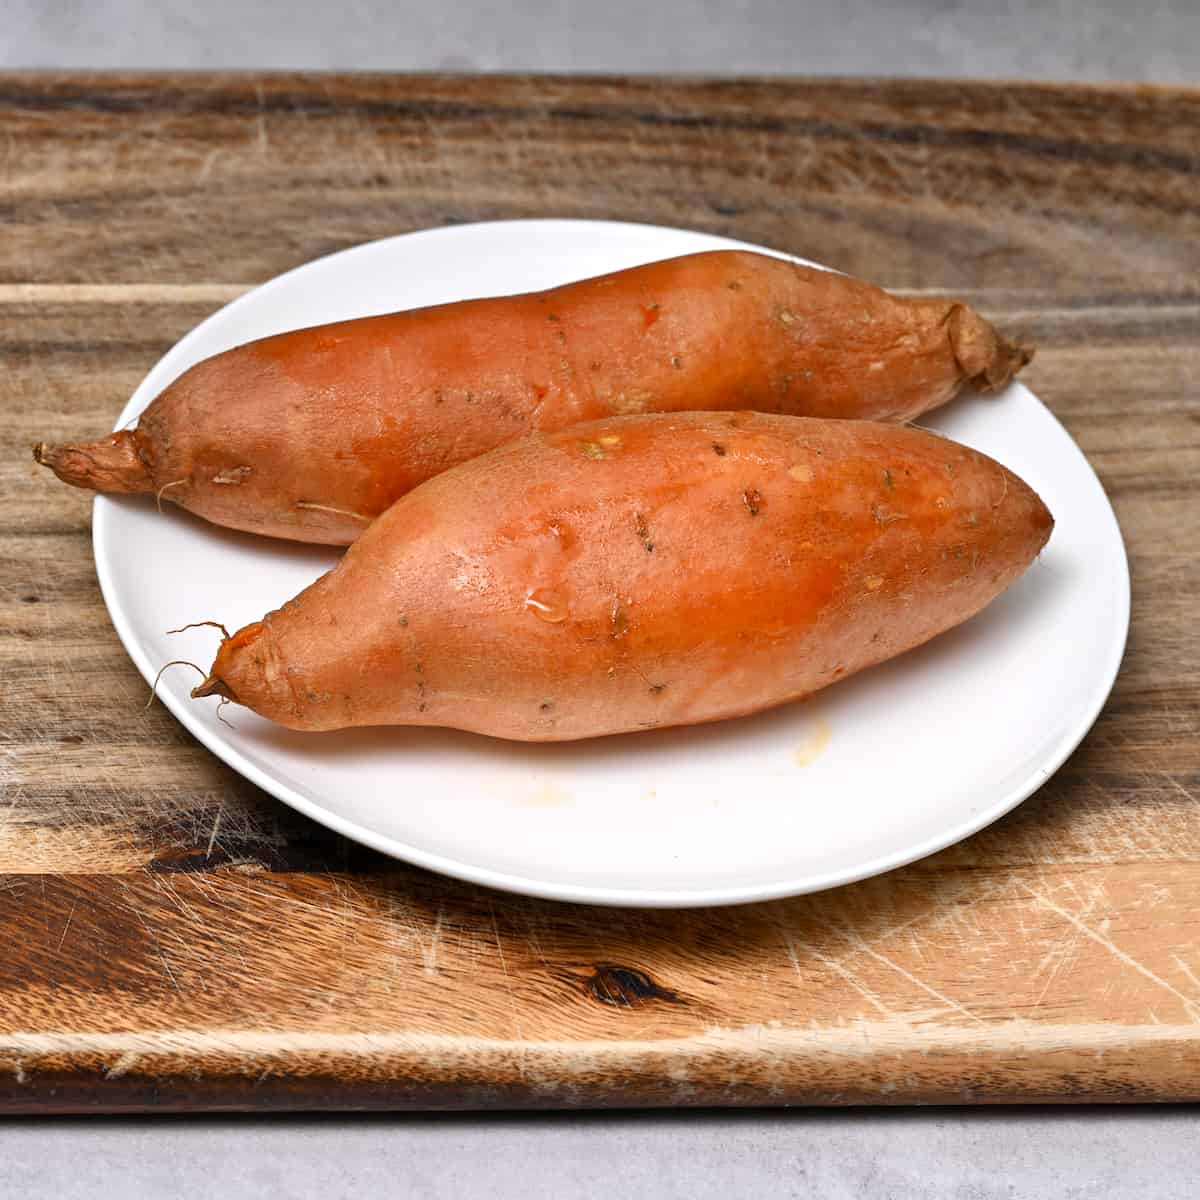 2 medium sized cooked sweet potatoes in a plate